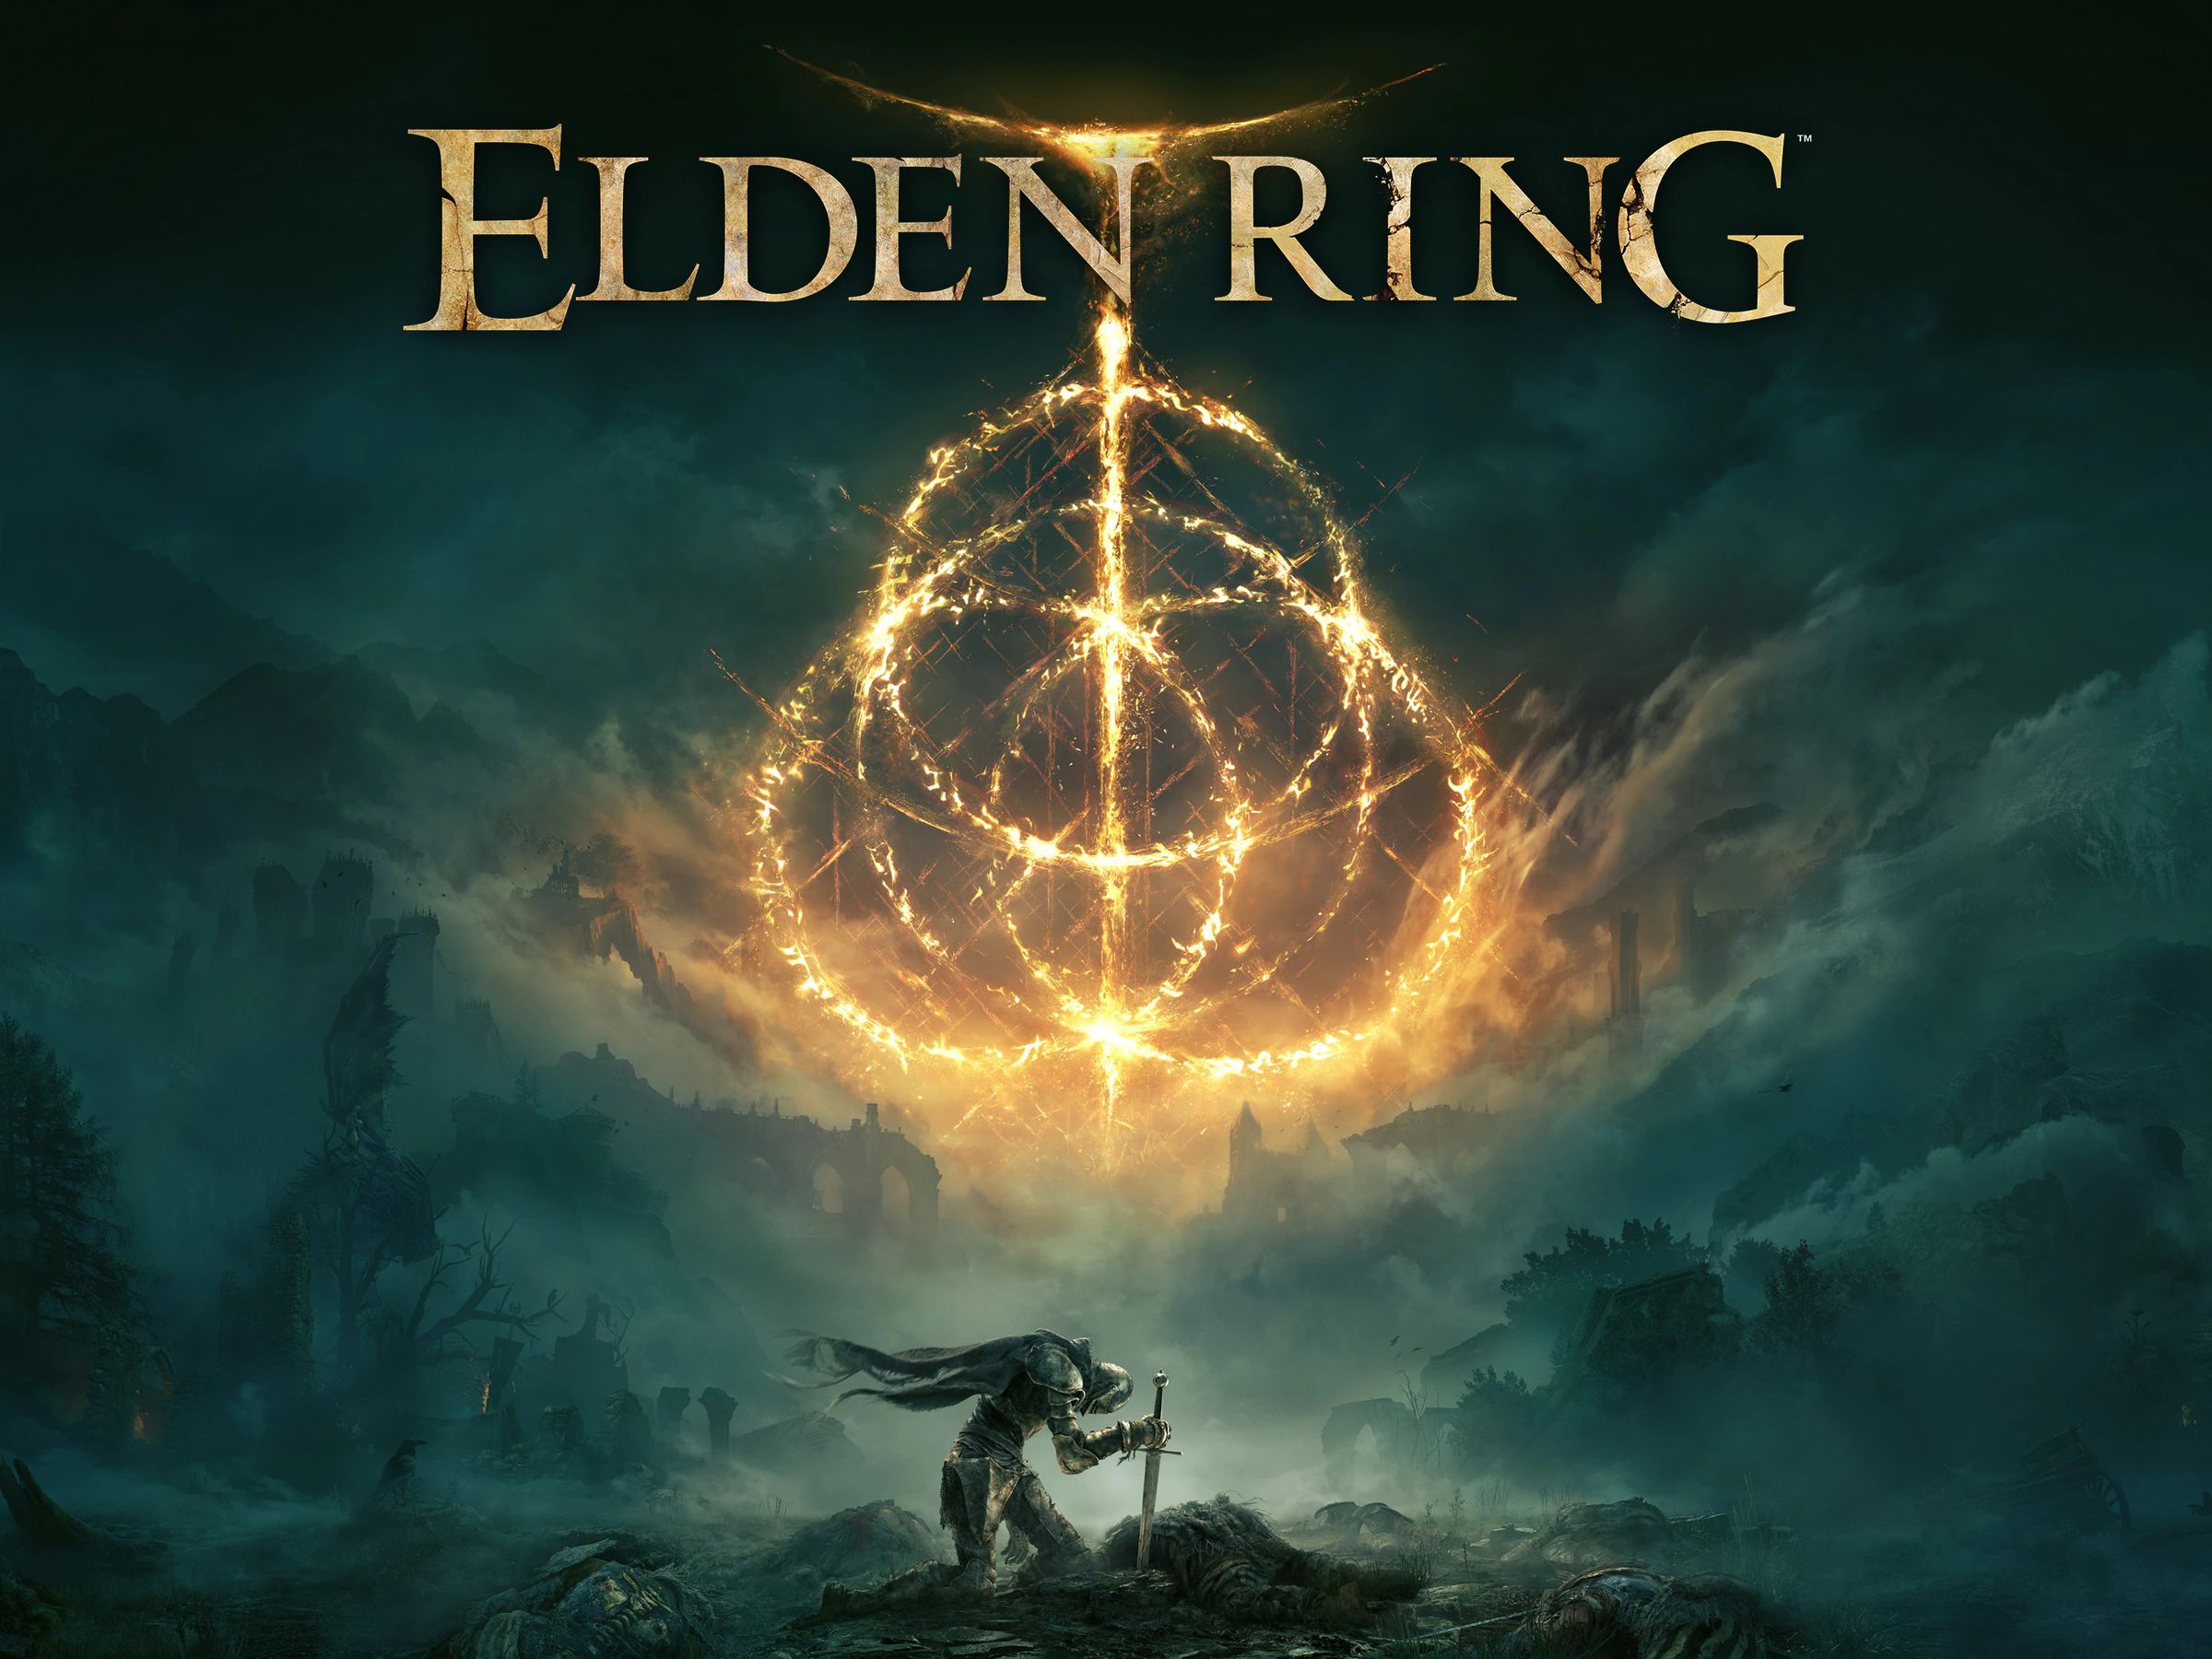 The Elden Ring banner art, depicting a knight below some glowing rings of fire.